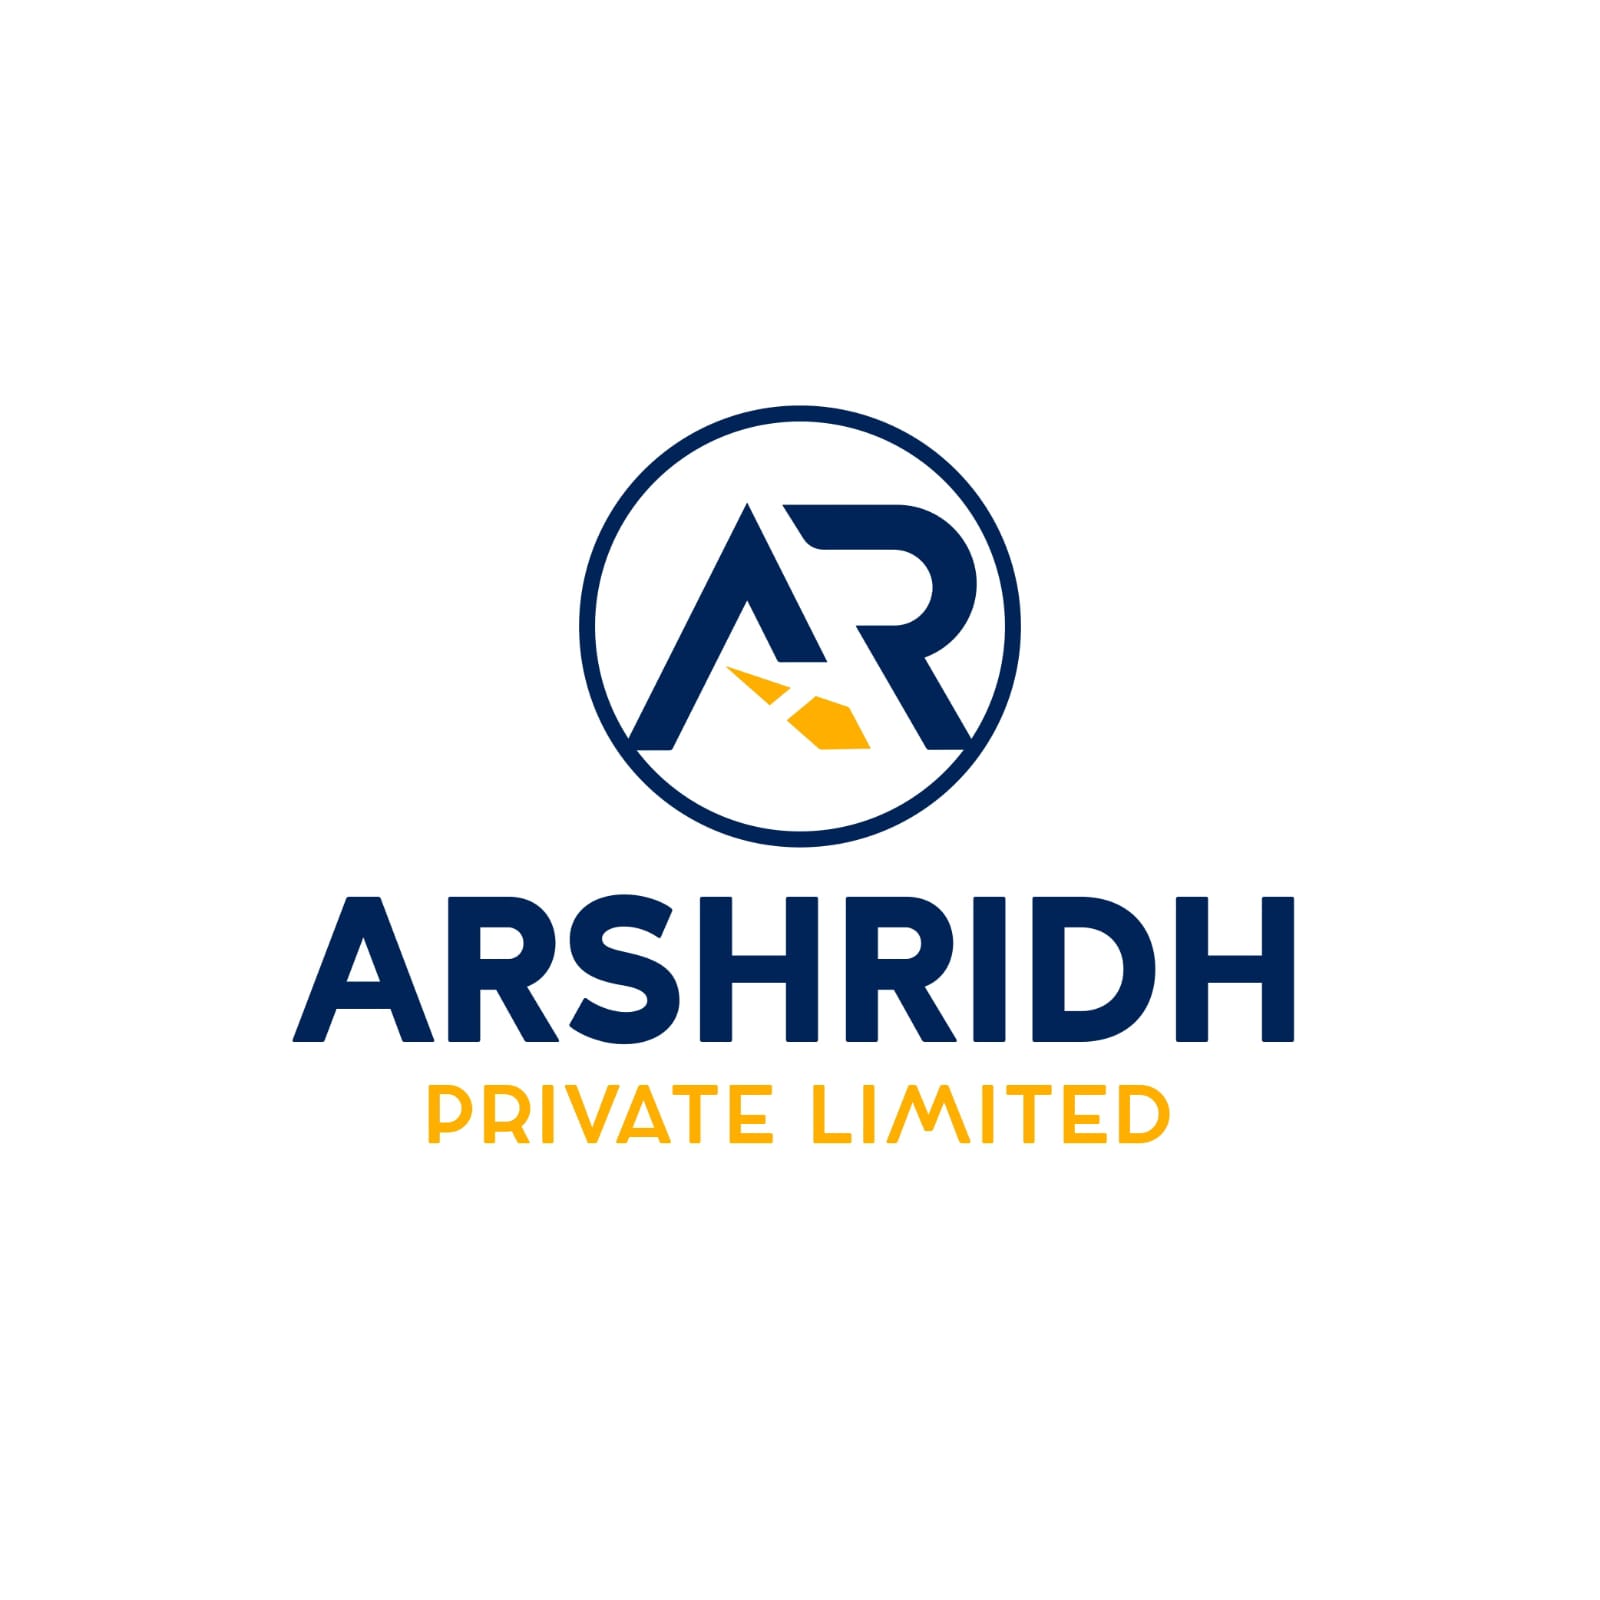 Arshridh Private Limited